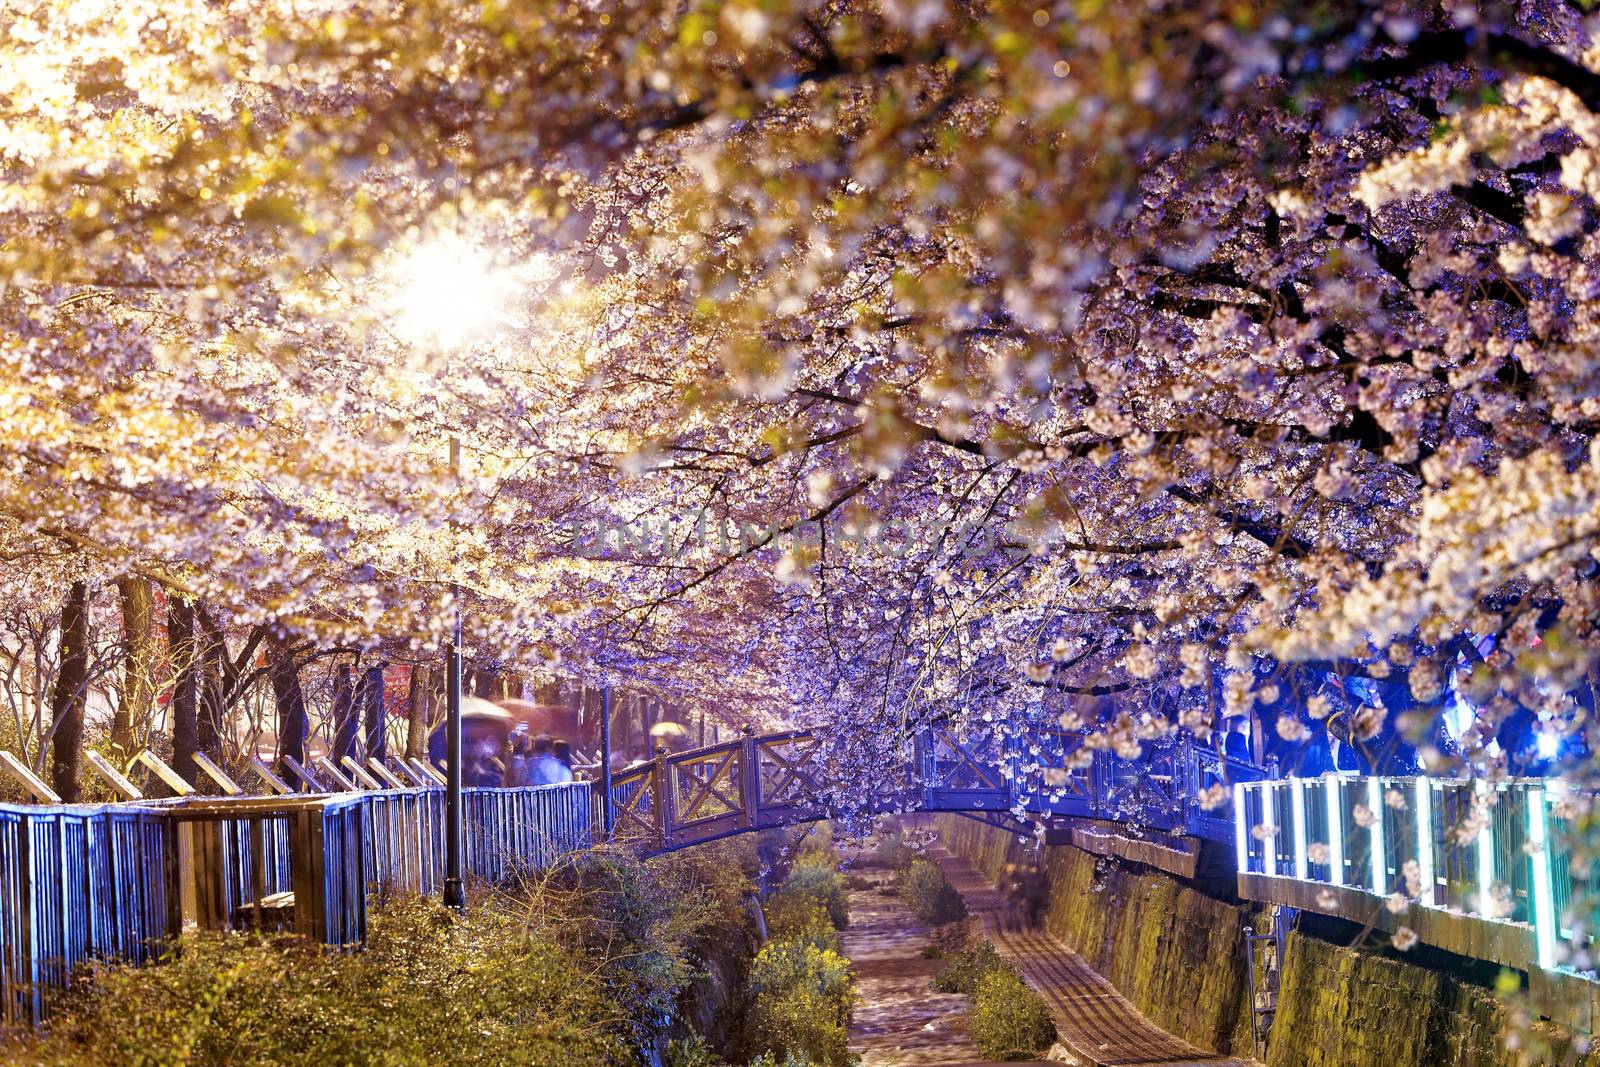 cherry blossoms at night, busan city in south korea